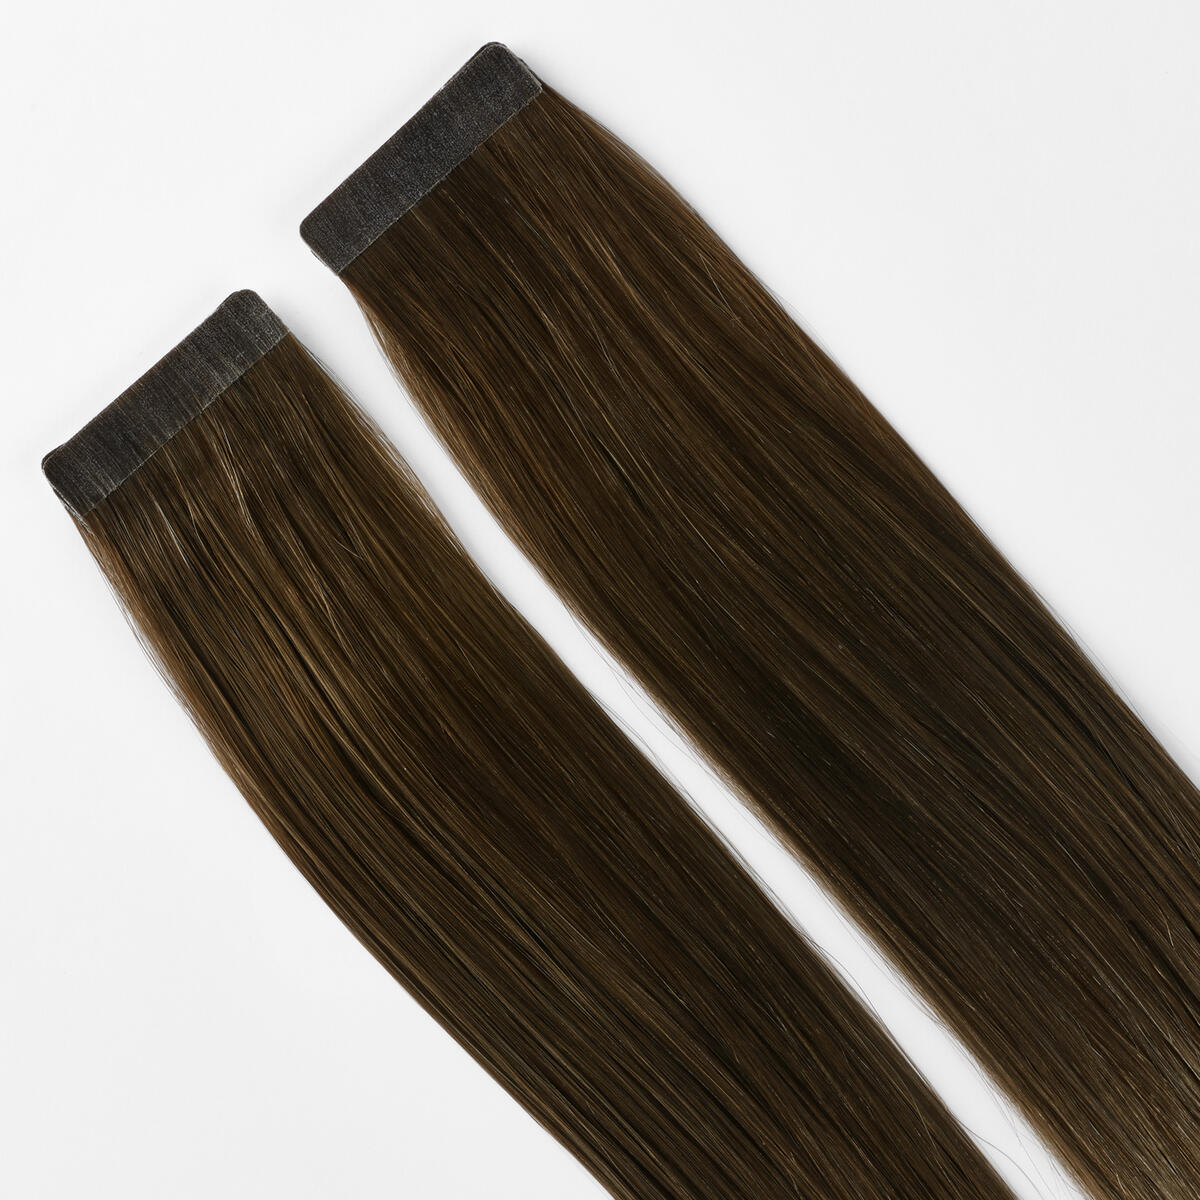 Basic Tape Extensions Classic 4 O2.6/8.0 Dark Ash Blond Ombre 50 cm